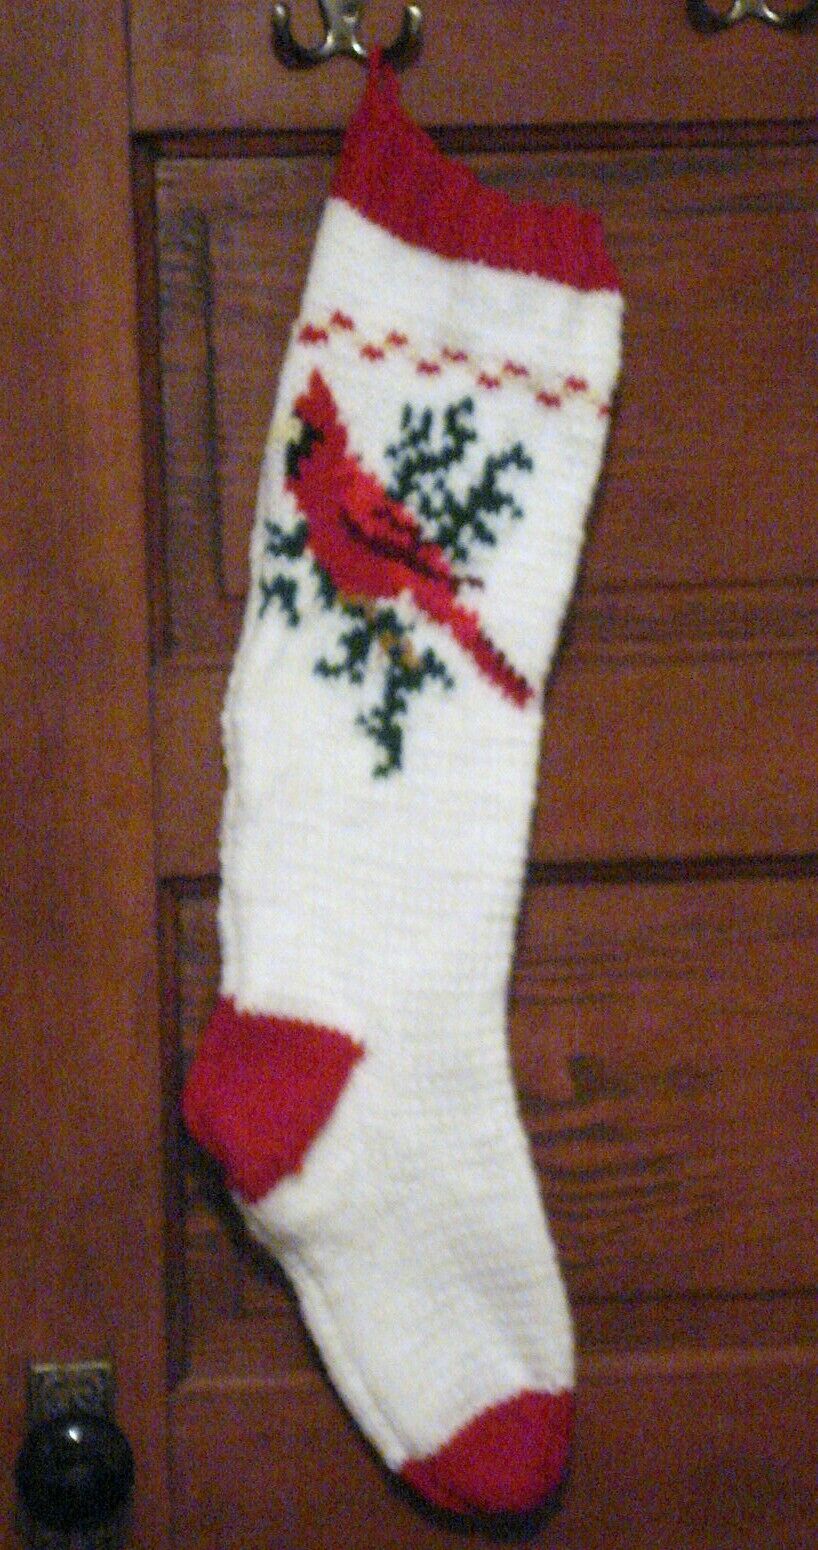 Hand knitted personalized Christmas stockings